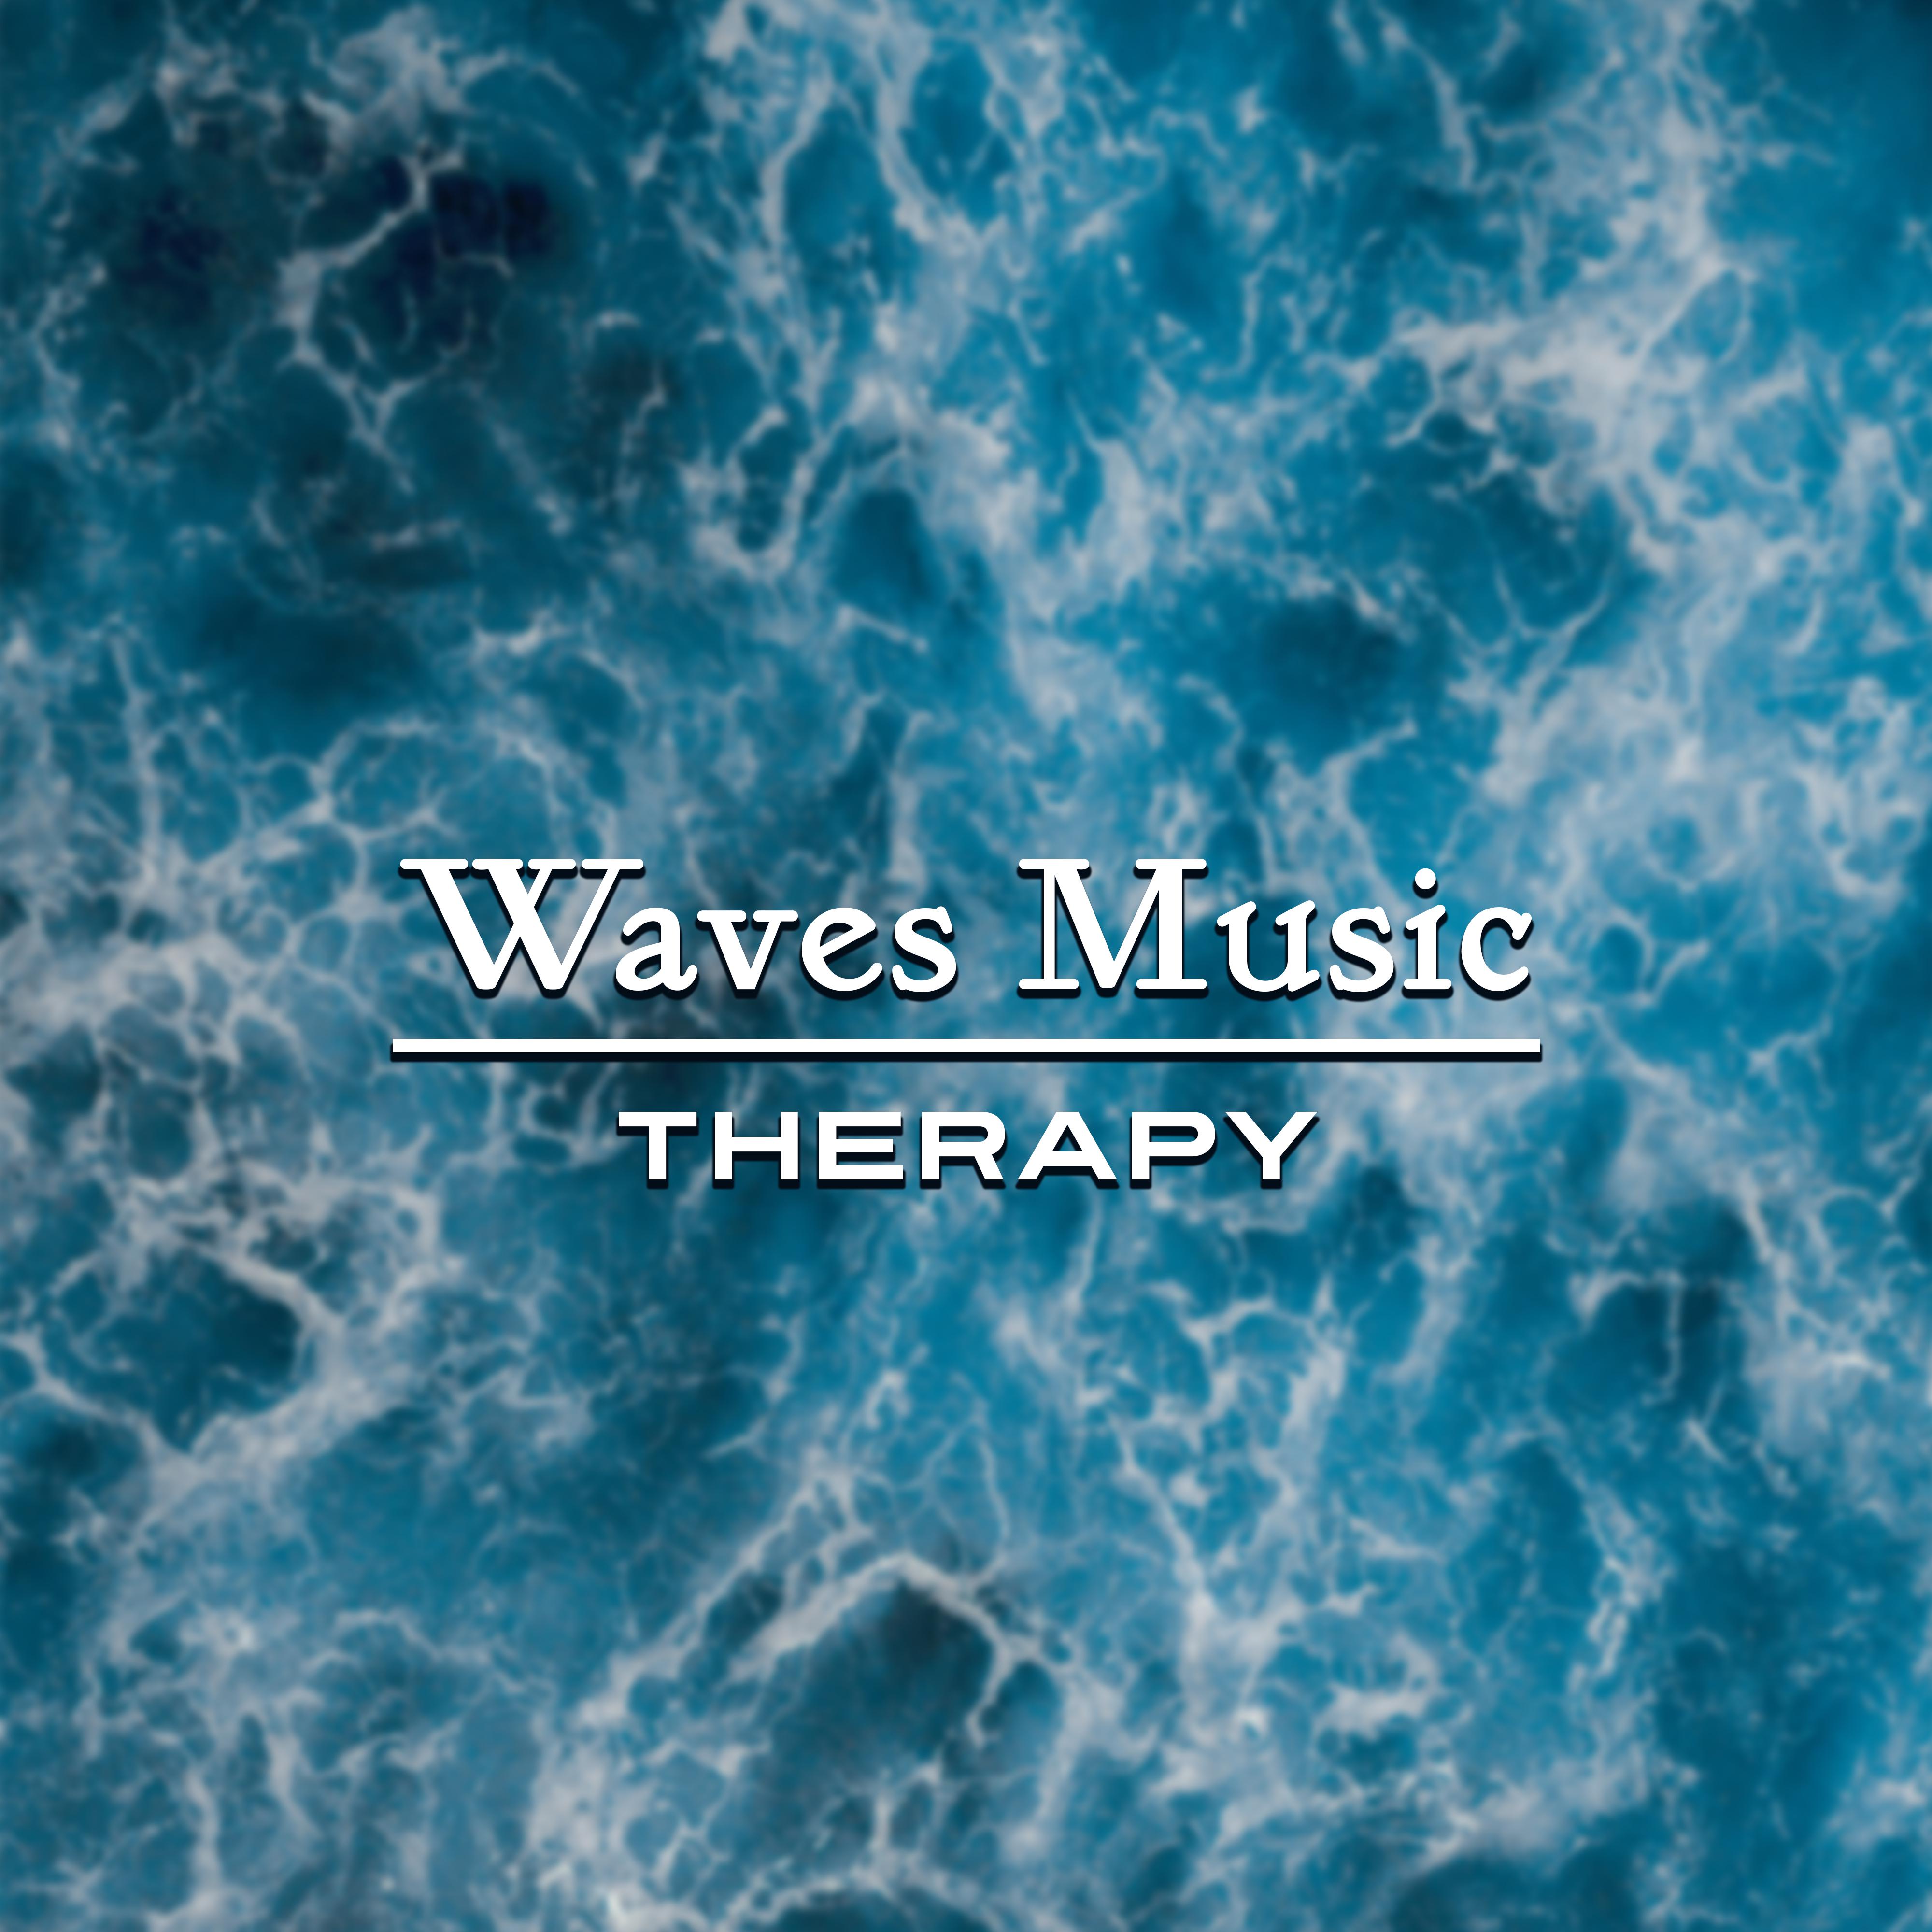 Waves Music Therapy  Sounds of Nature, Calming Waves, Zen, Rest, Relief Stress, New Age 2017